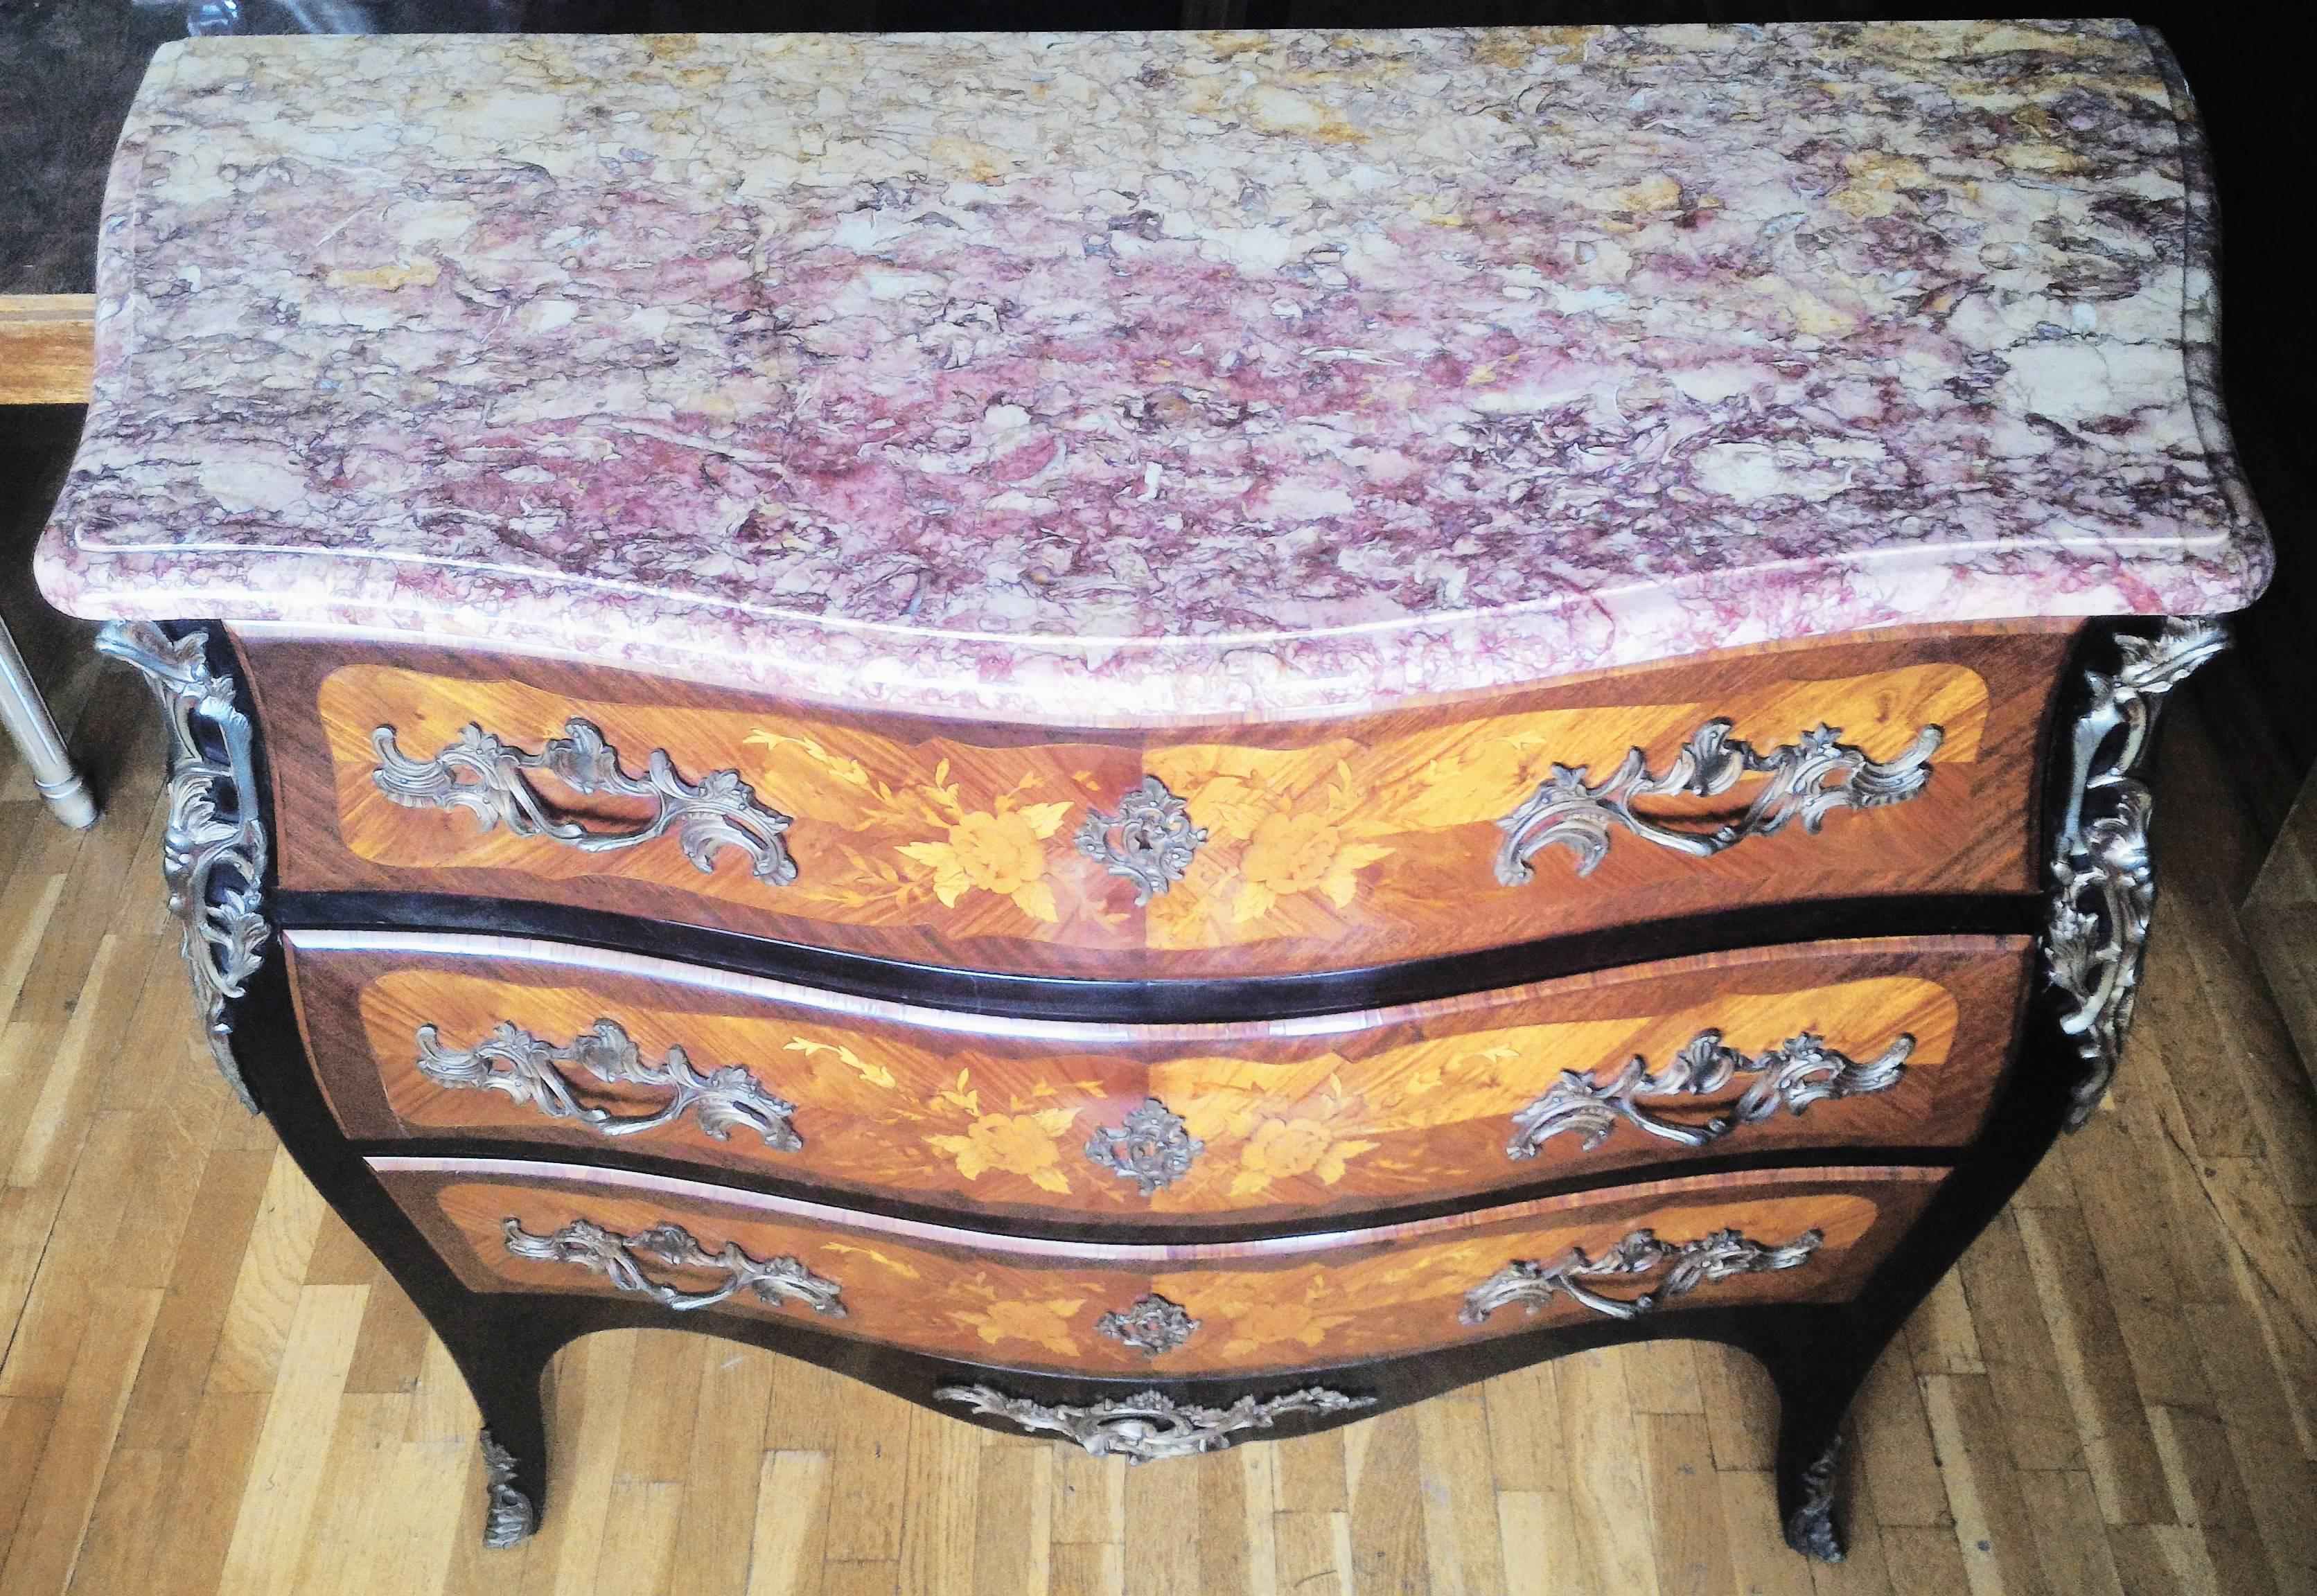 Elegant bedroom set in Louis XV style. Made in a beautiful inlay of several beautiful and different wood types marquetry floral composition.
It has a sublime color mix of burgundy marble top, and bronze ornamentations in gilded ormolu mounts that